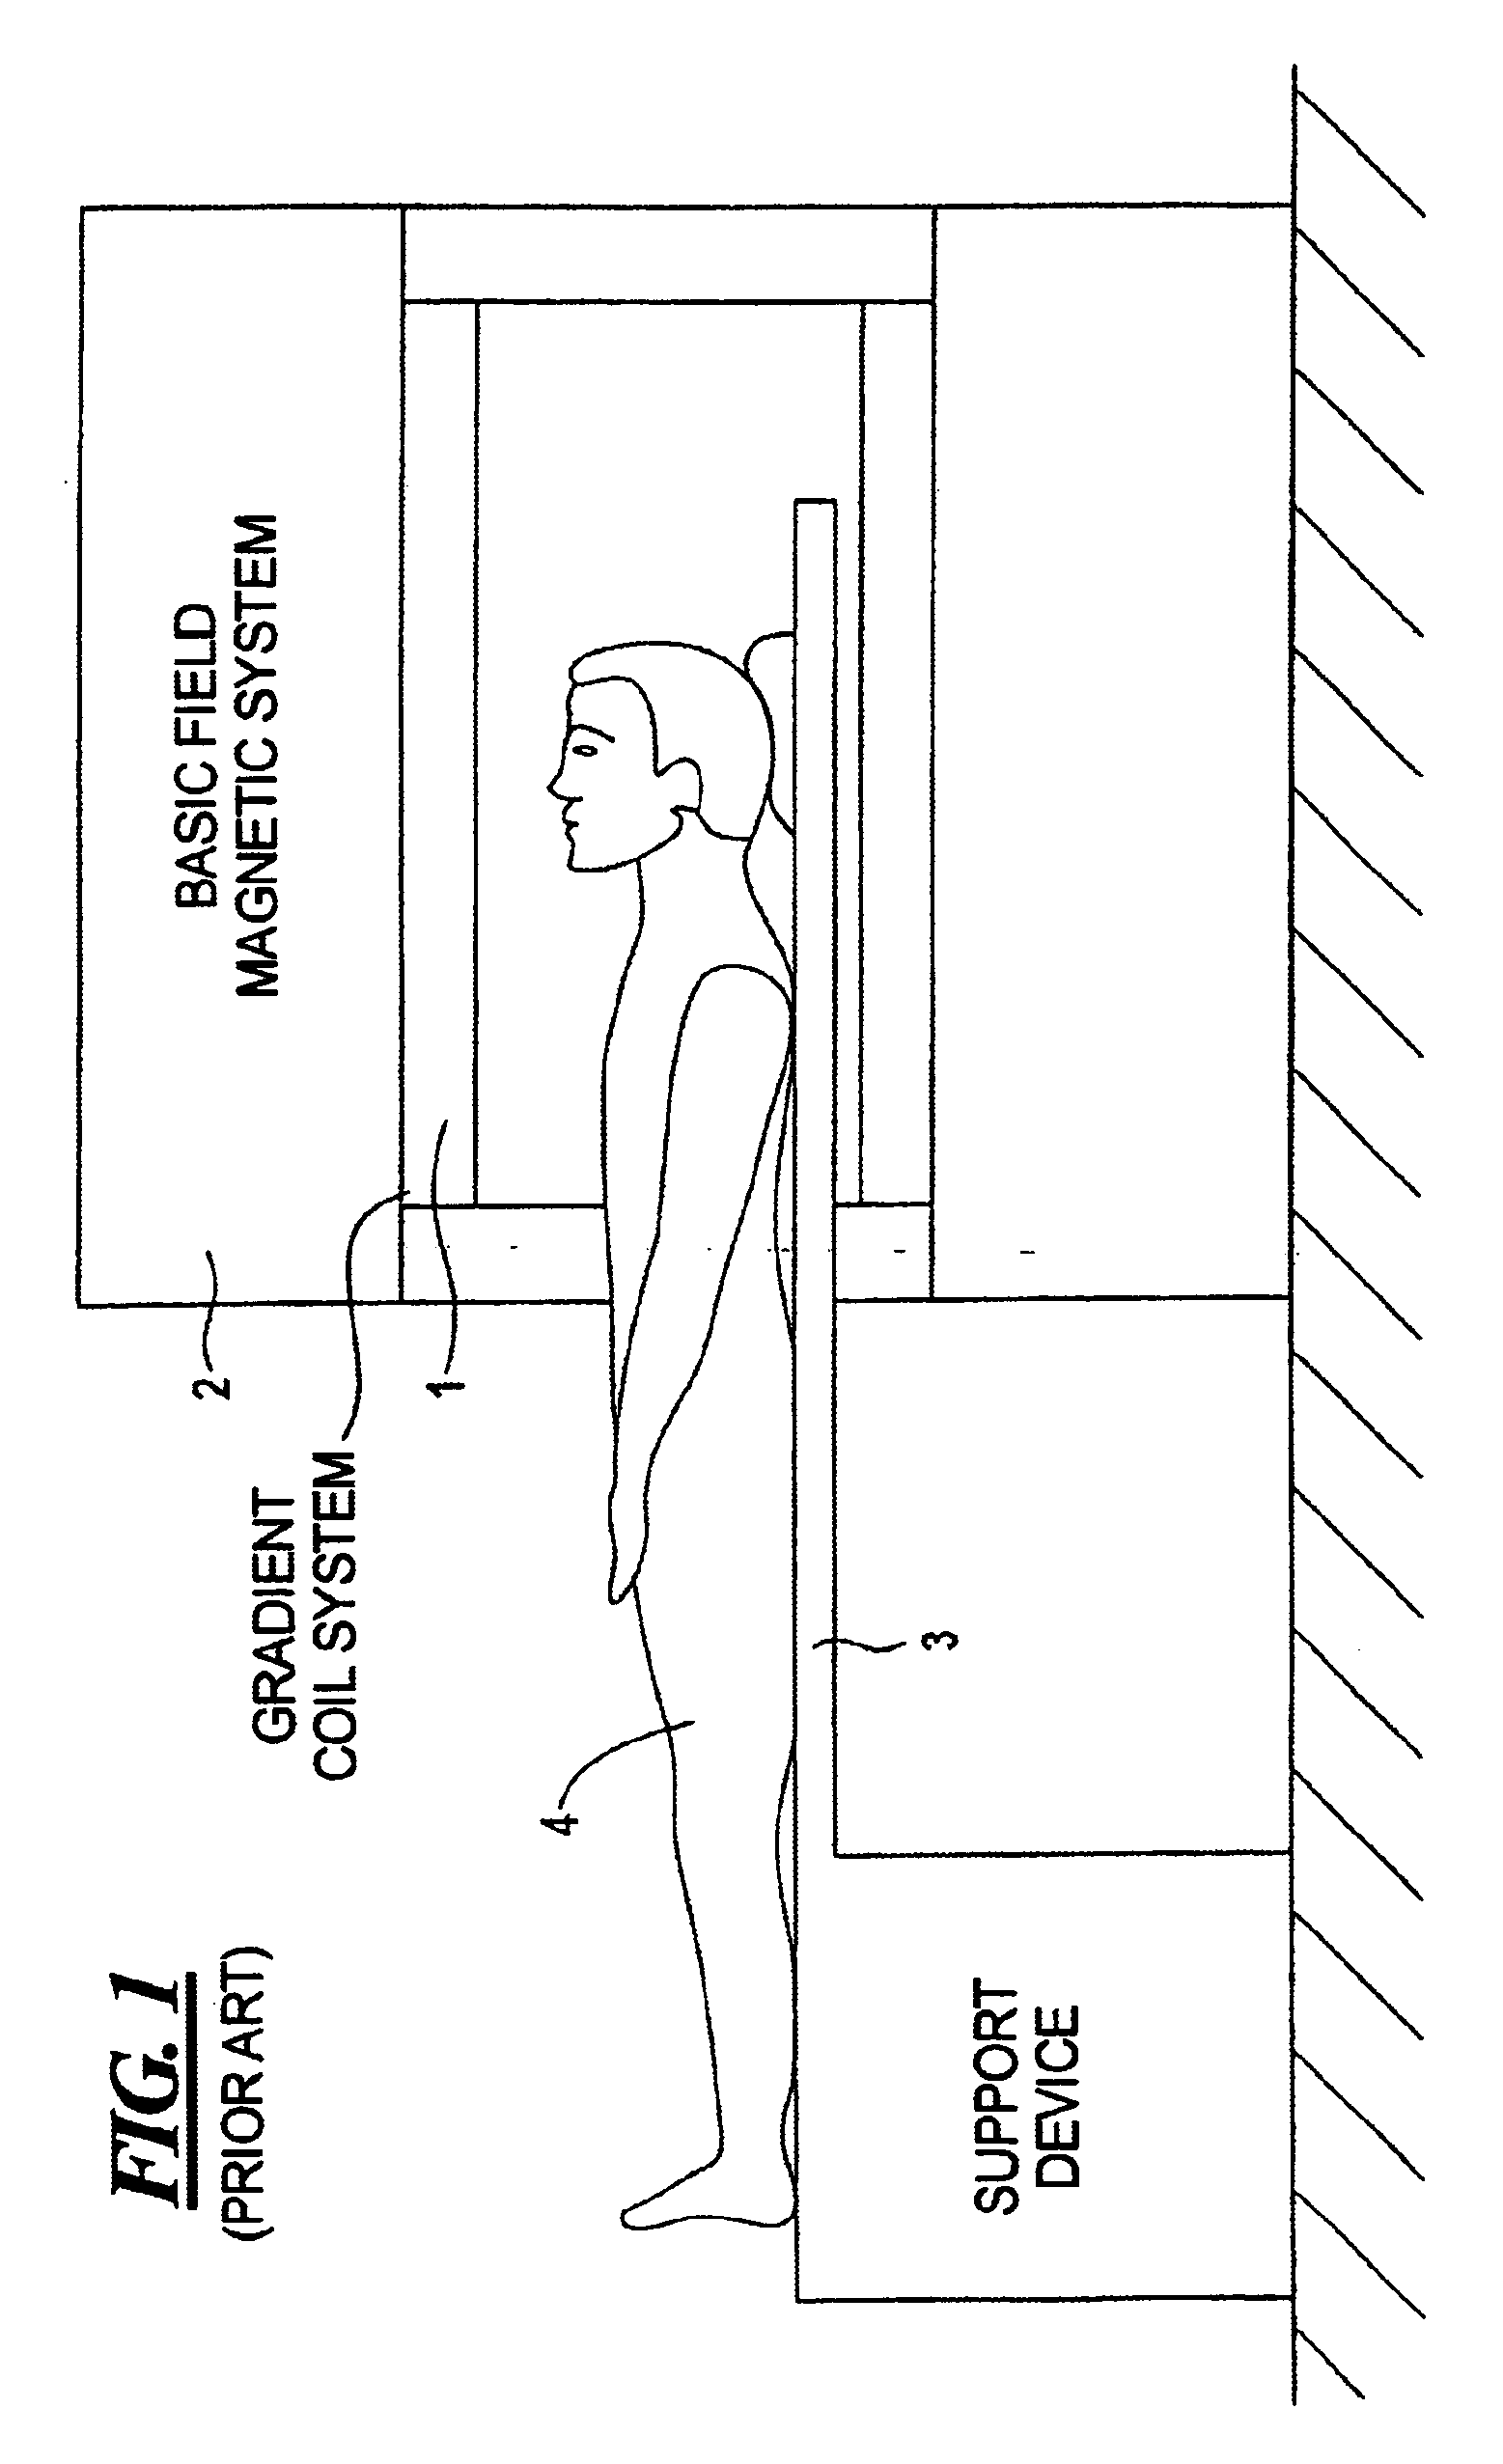 Magnetic resonance gradient coil with a heat insulator disposed between the electrical conductor and the carrier structure